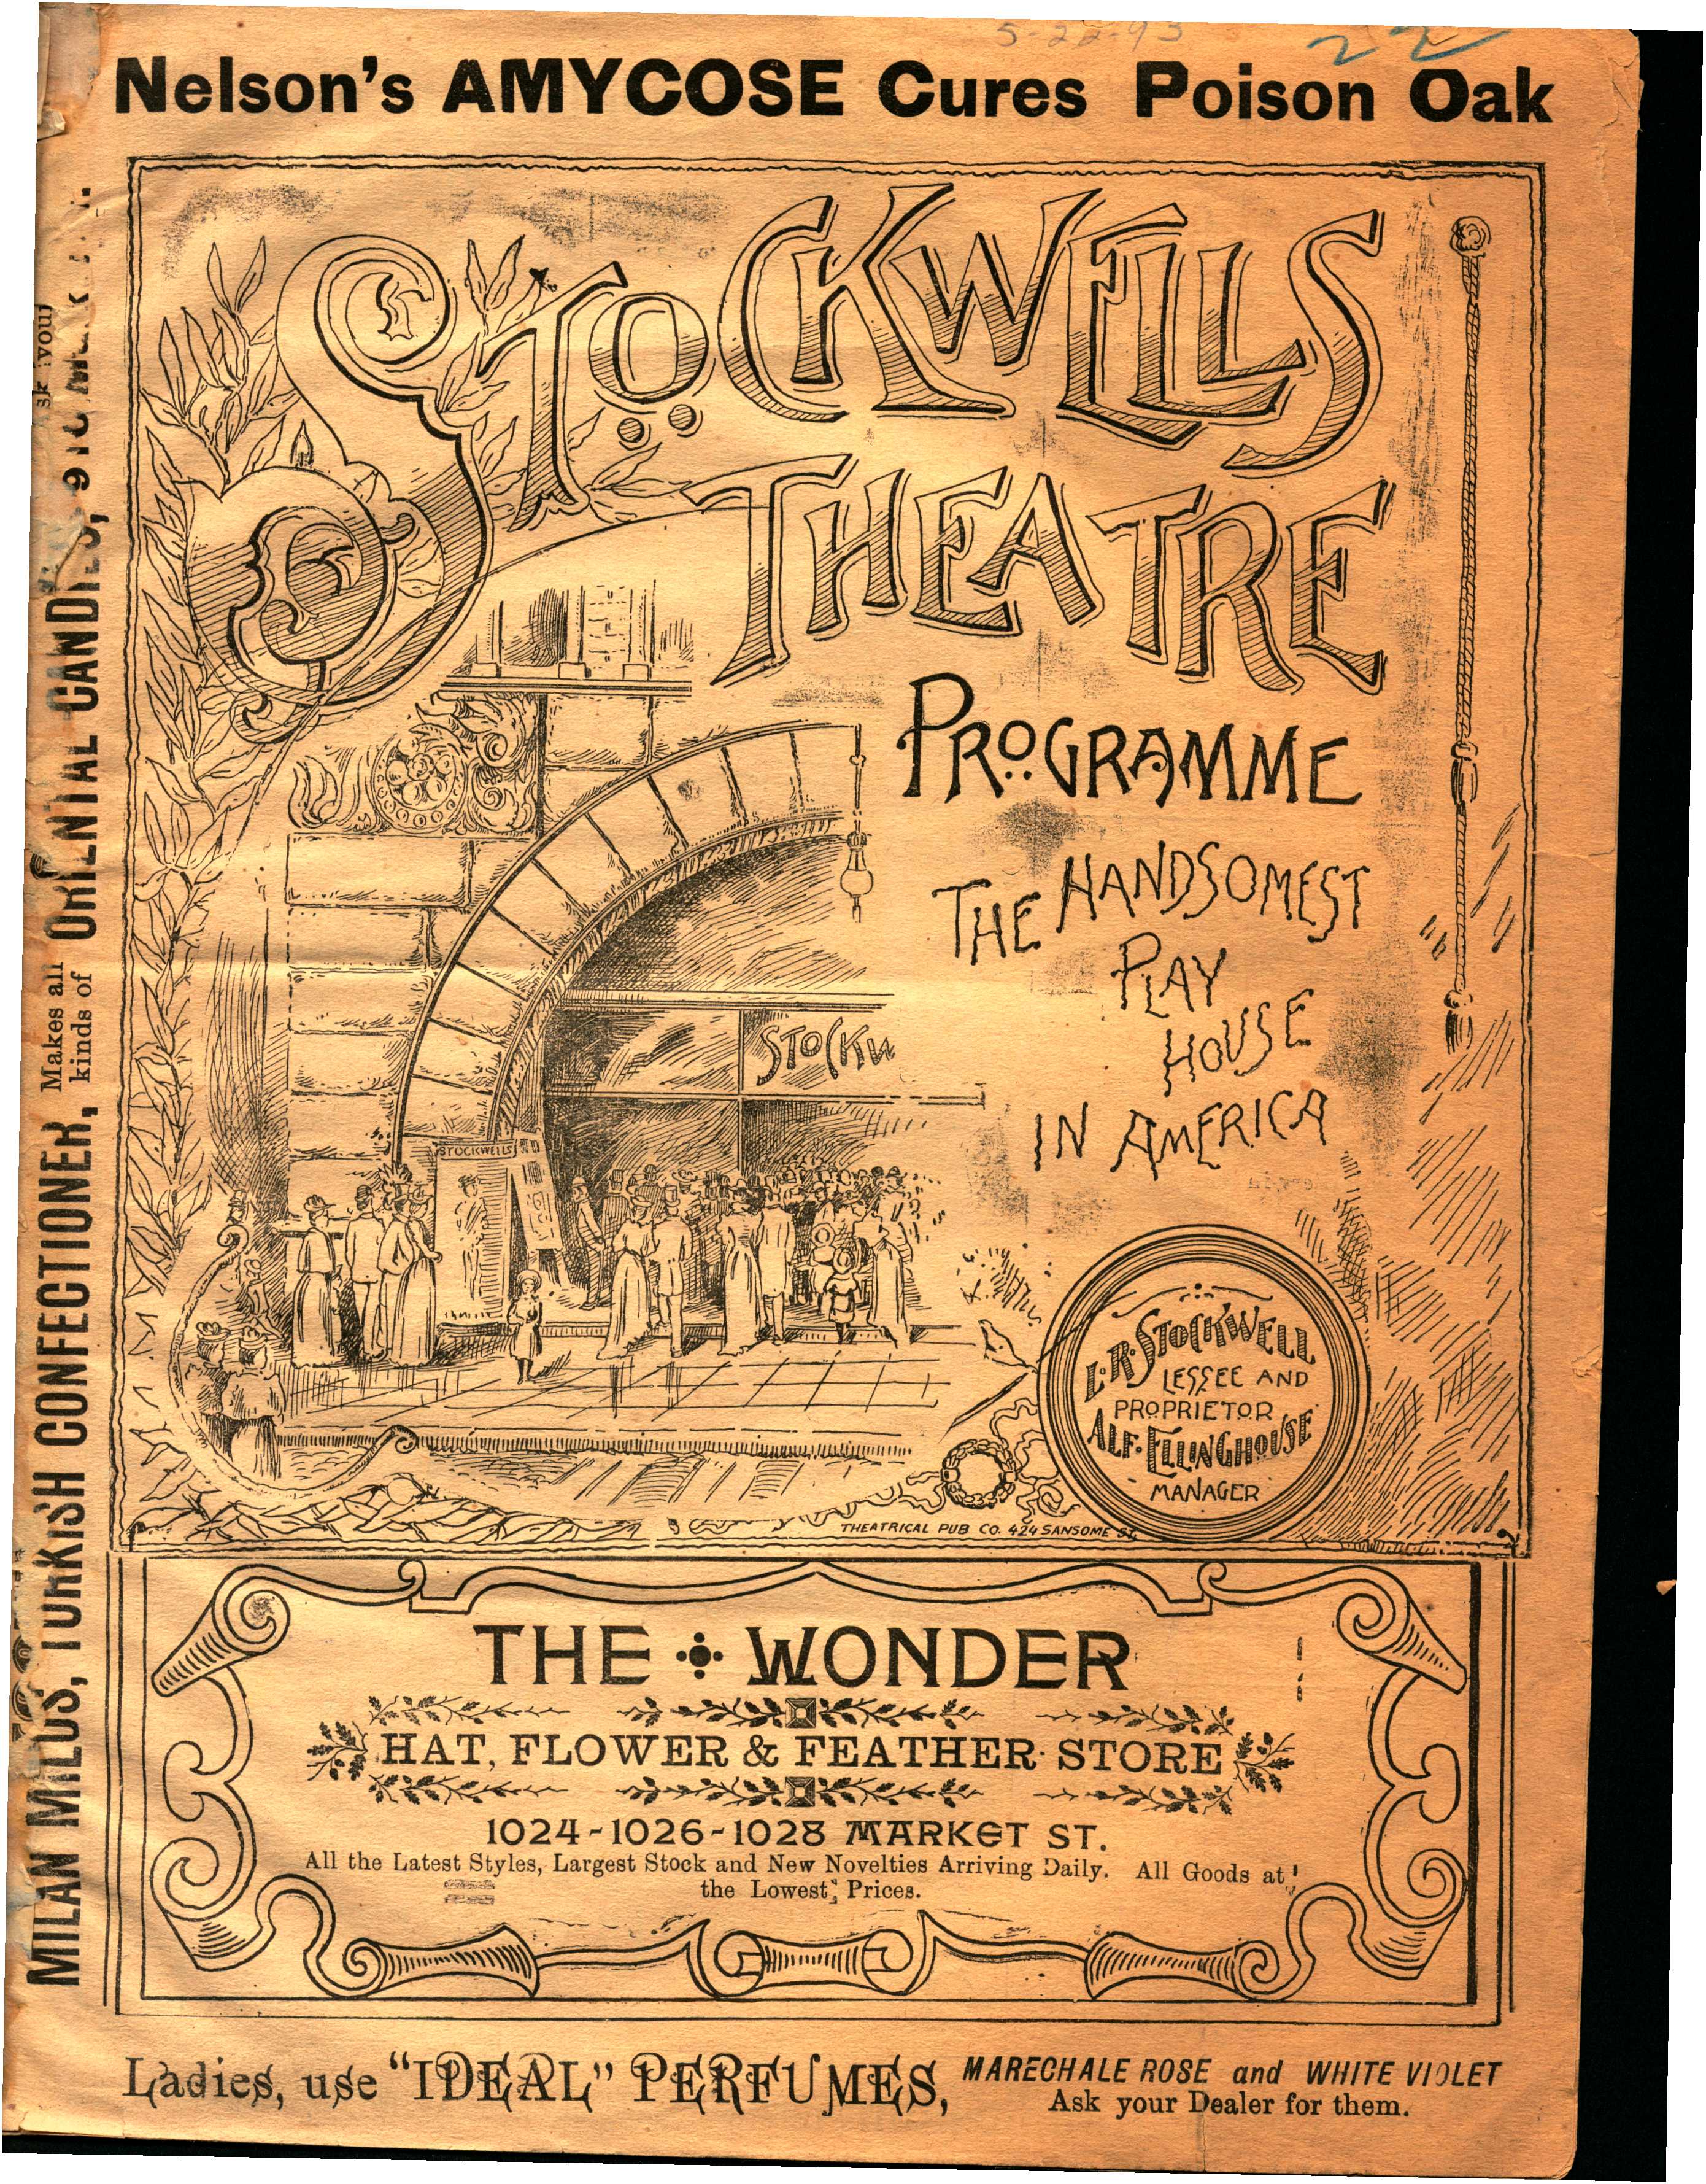 Front cover shows people walking into the theatre, theatre information and a few advertisements